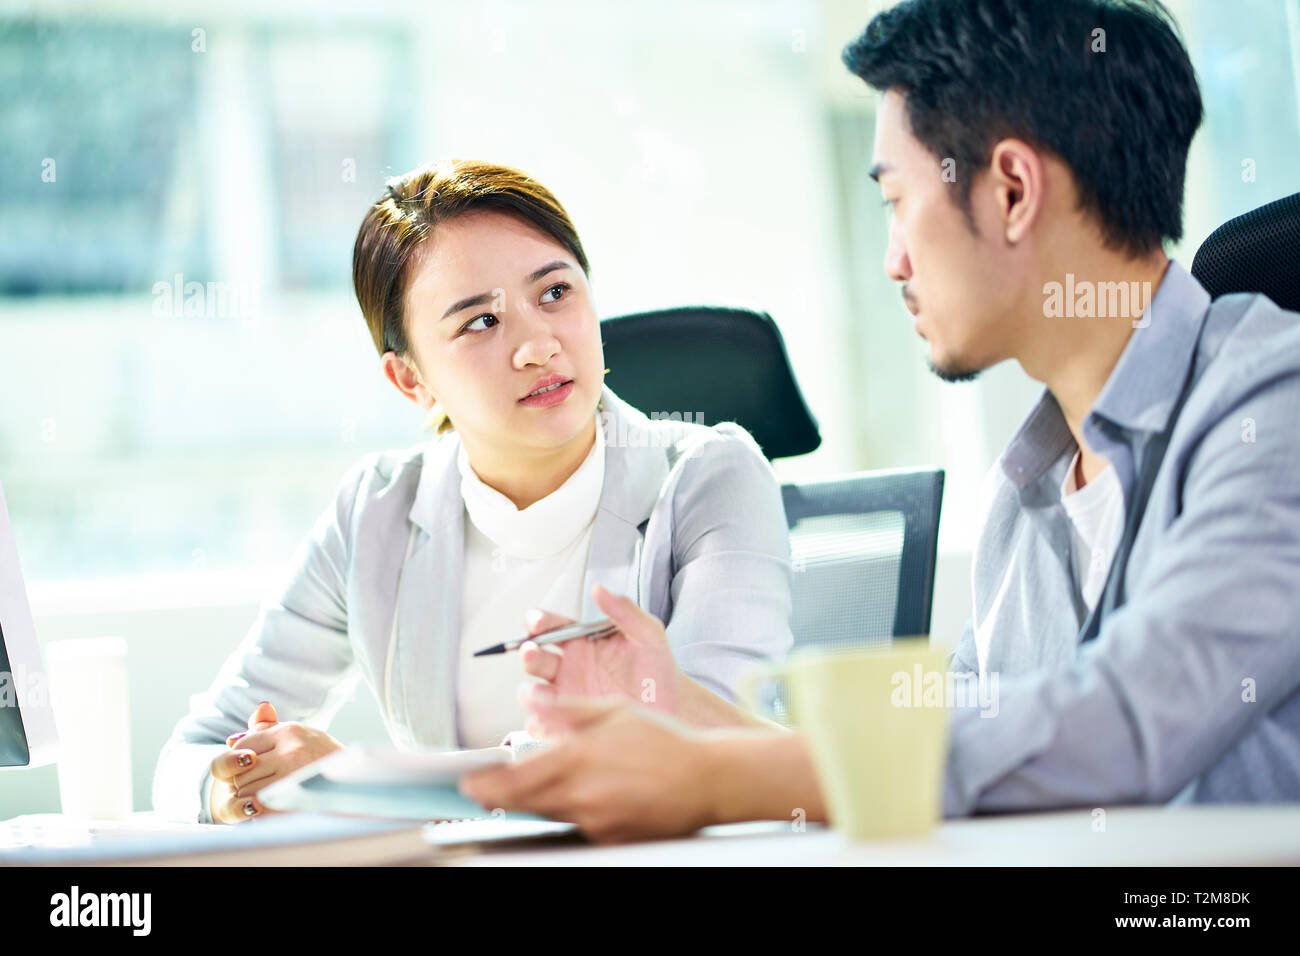 asian businessman and businesswoman working together in office discussing business plan. Stock Photo